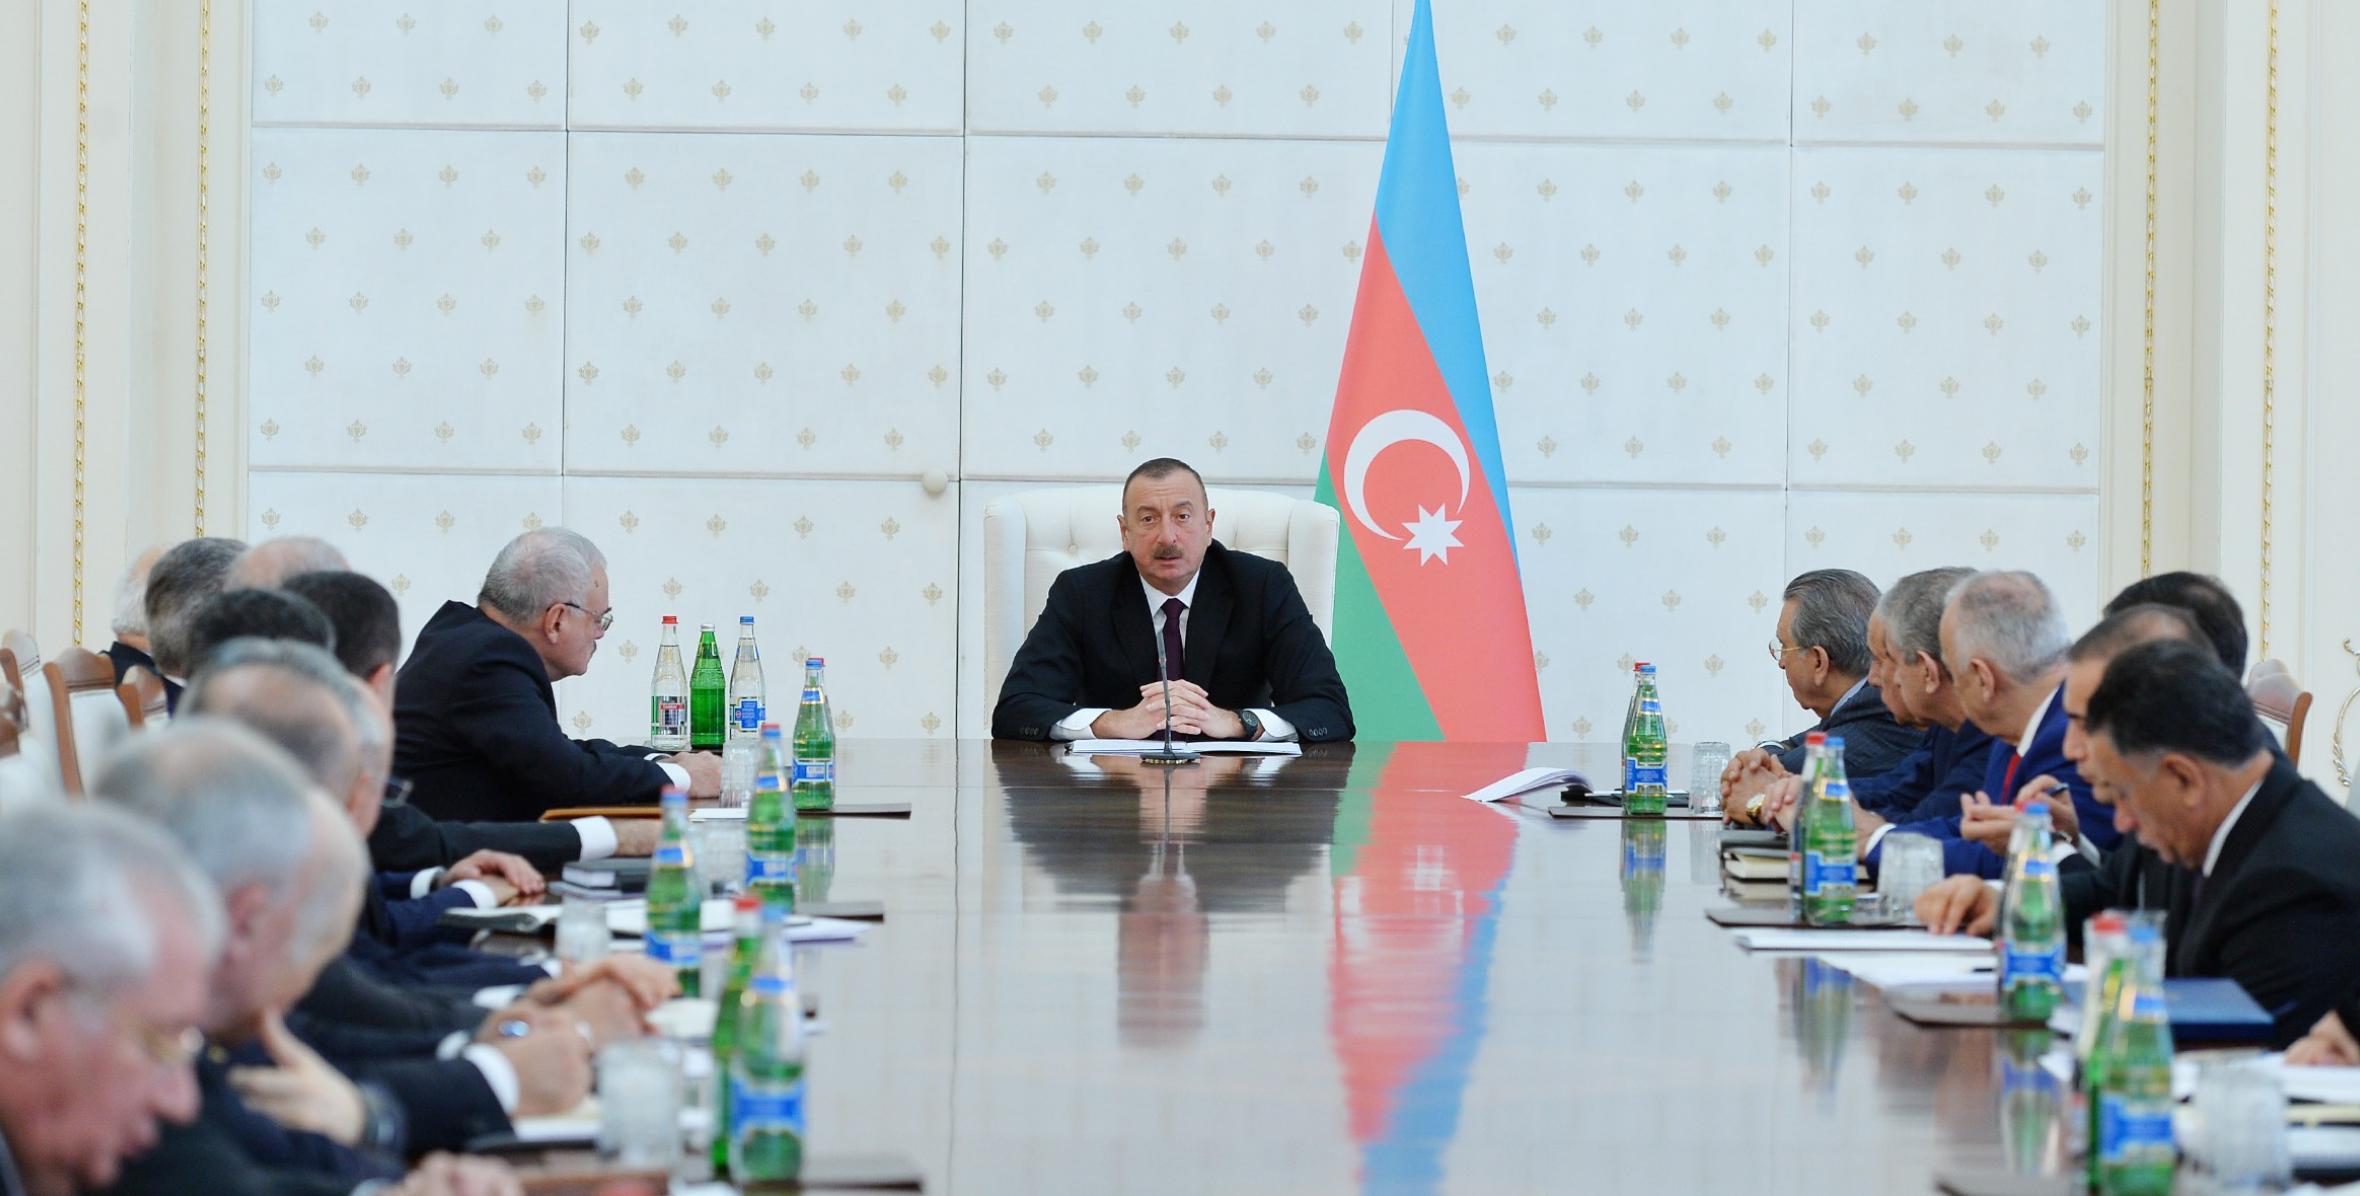 Ilham Aliyev chaired meeting of Cabinet of Ministers dedicated to results of socioeconomic development of 2017 and objectives for future